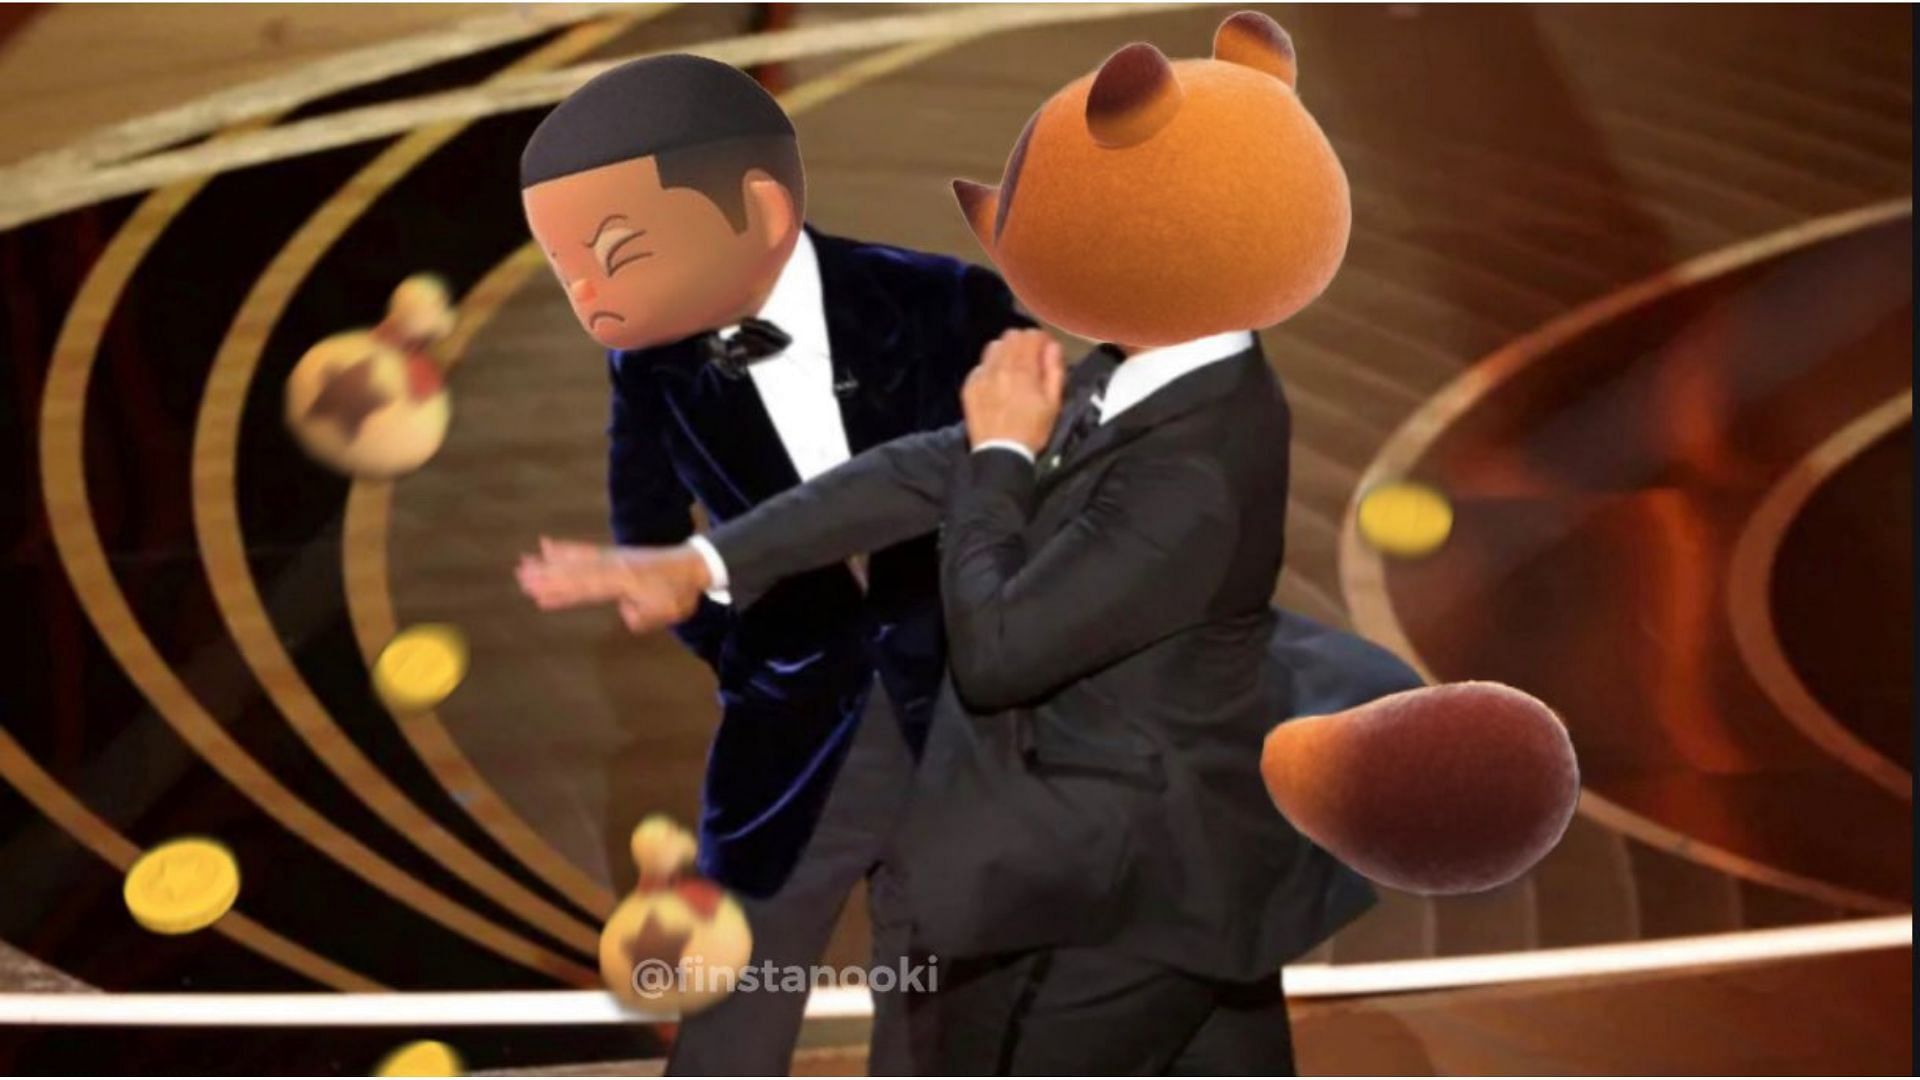 Animal Crossing: New Horizons player recreates iconic Will Smith slap from Oscars 2022 (Image via @Canela_chair/Twitter)